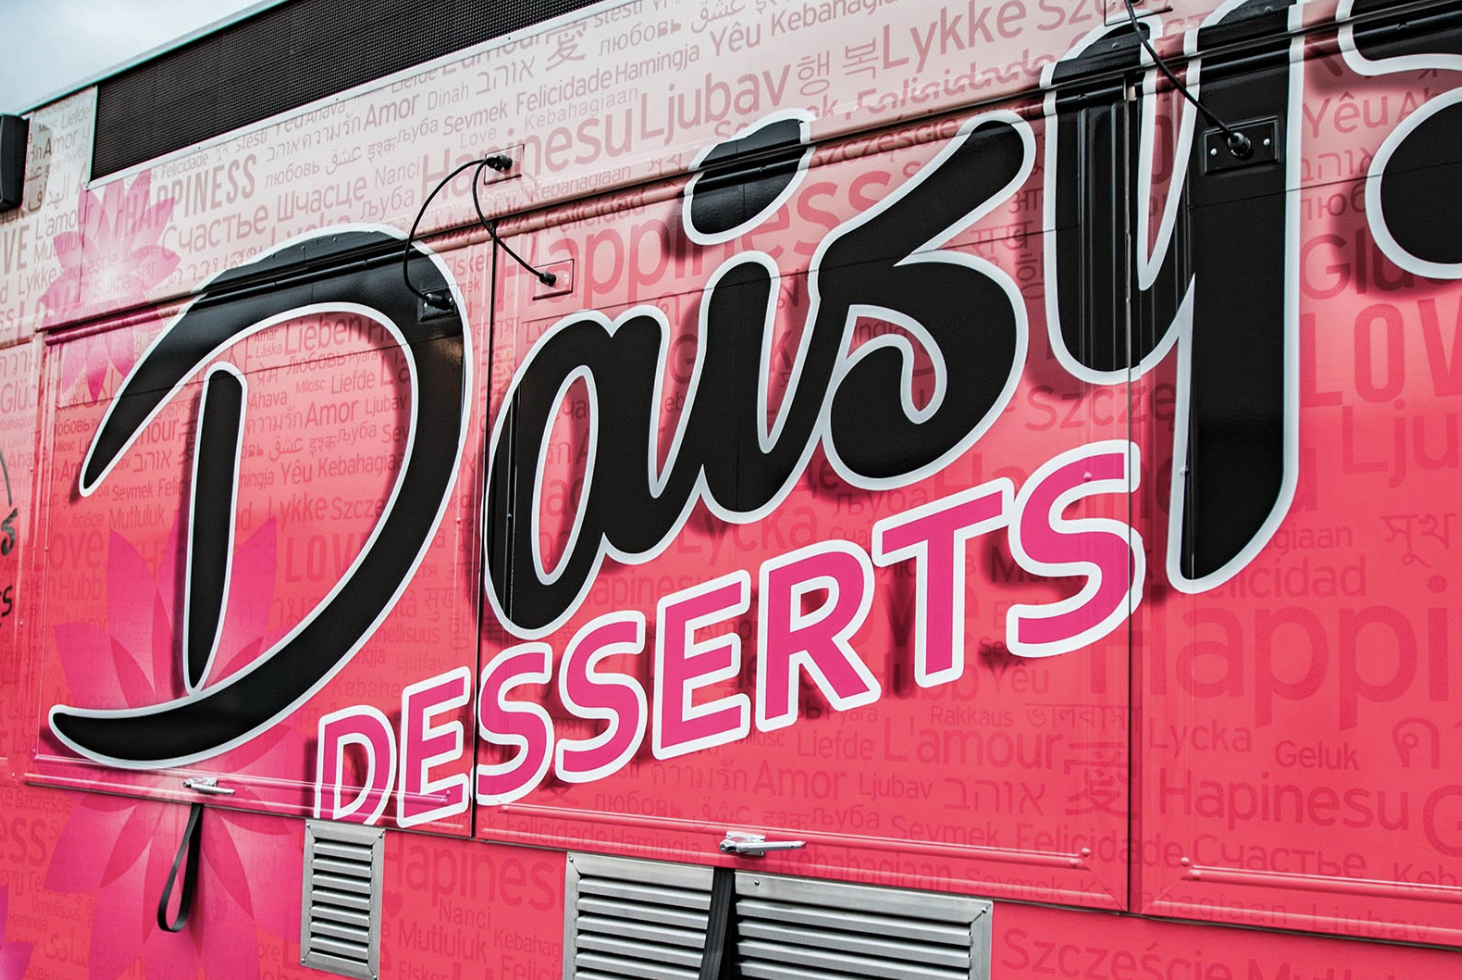 Daisy’s Desserts calls itself a “dessertery on wheels, a food truck that’s bringing all the sweet treats you can handle in a myriad of mouthwatering forms.” 